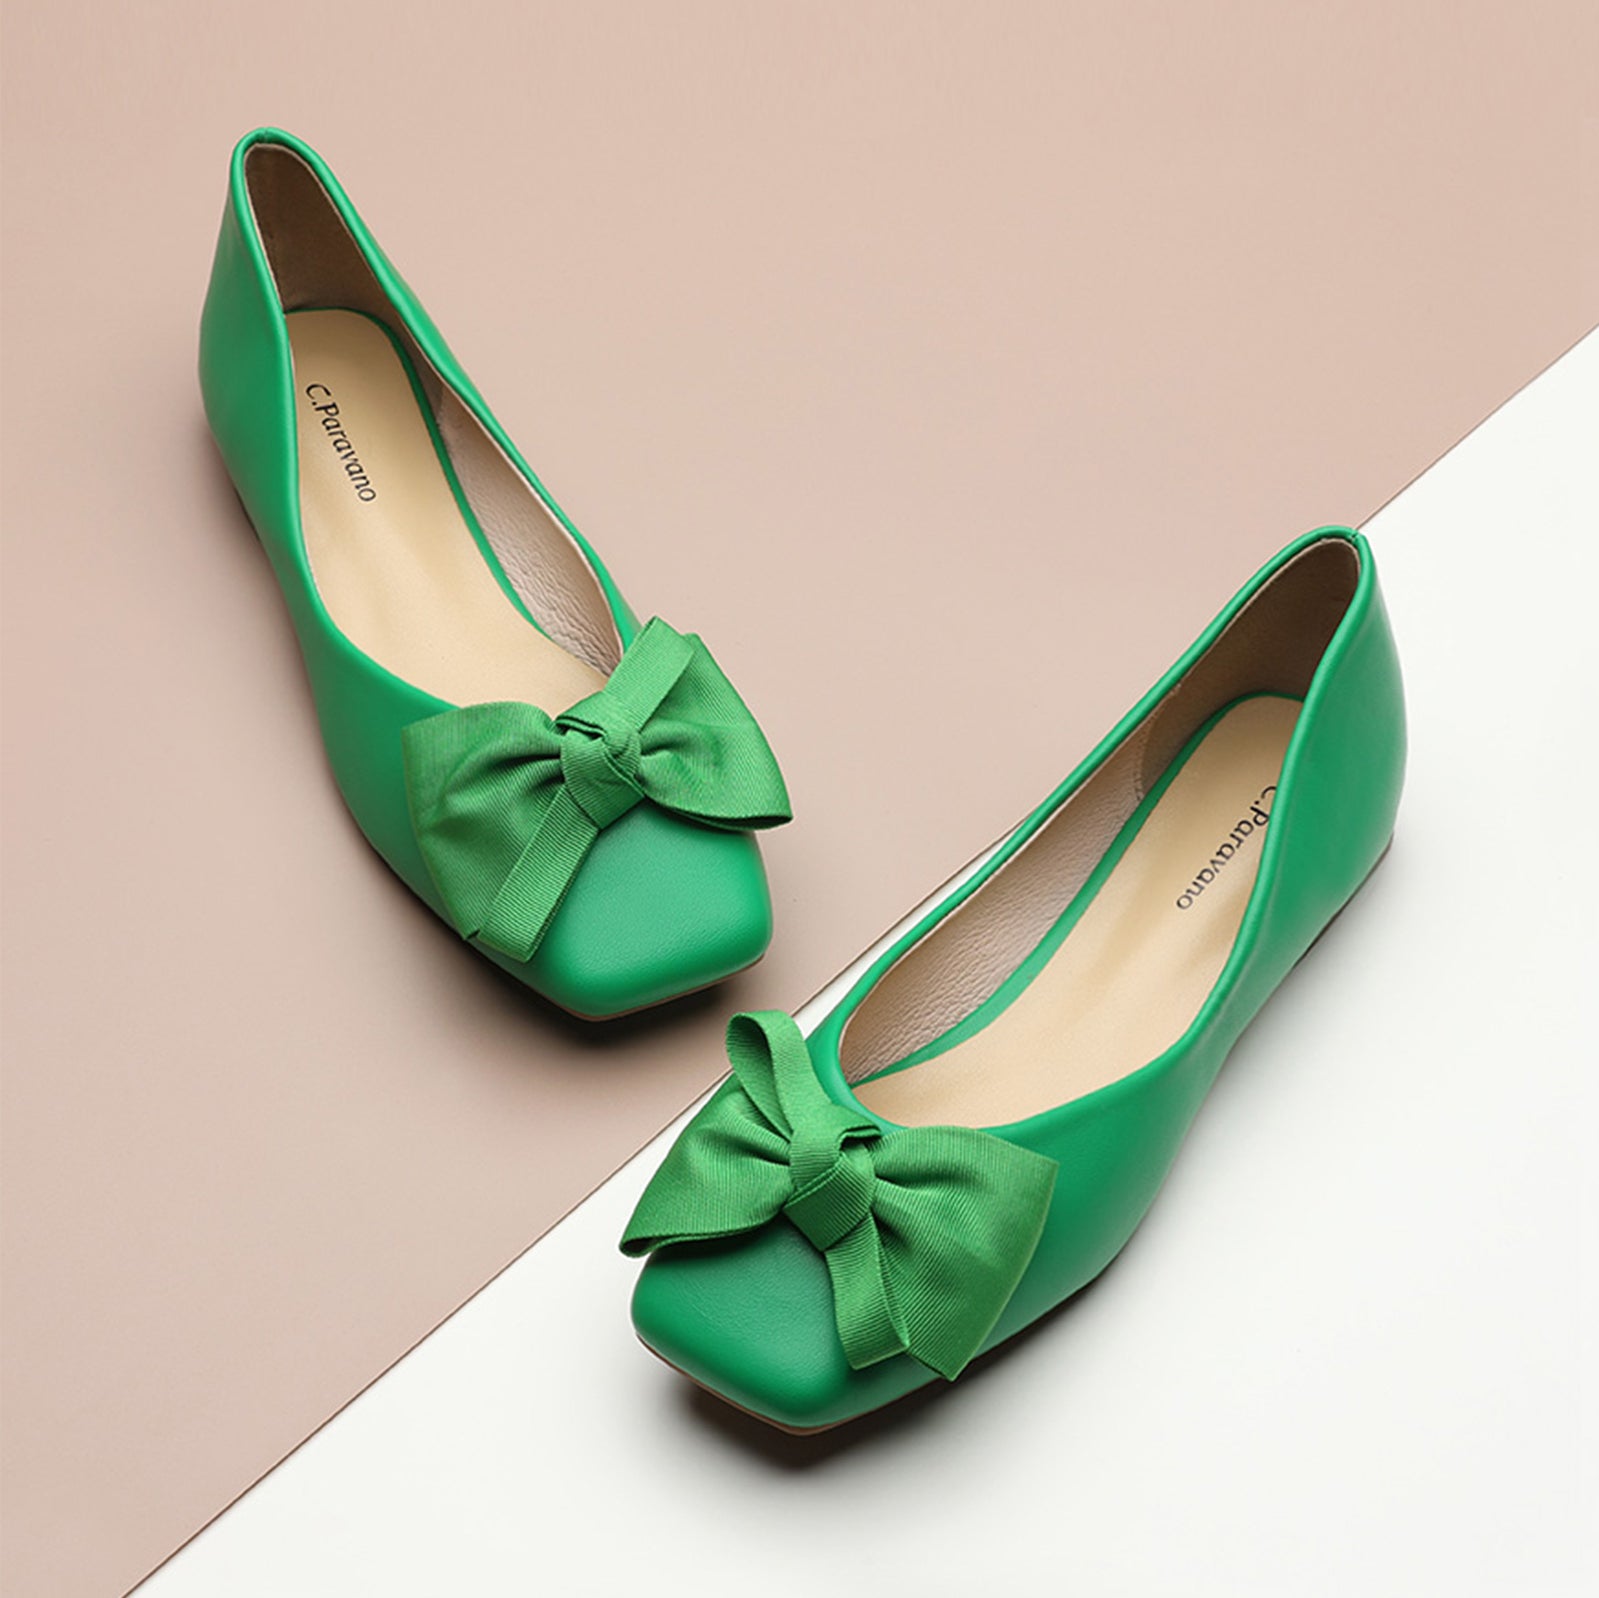  Embrace the beauty of nature with these verdant green square-toe flats, featuring an elegant bowknot and crafted from soft, high-quality leather for a stylish and comfortable look.